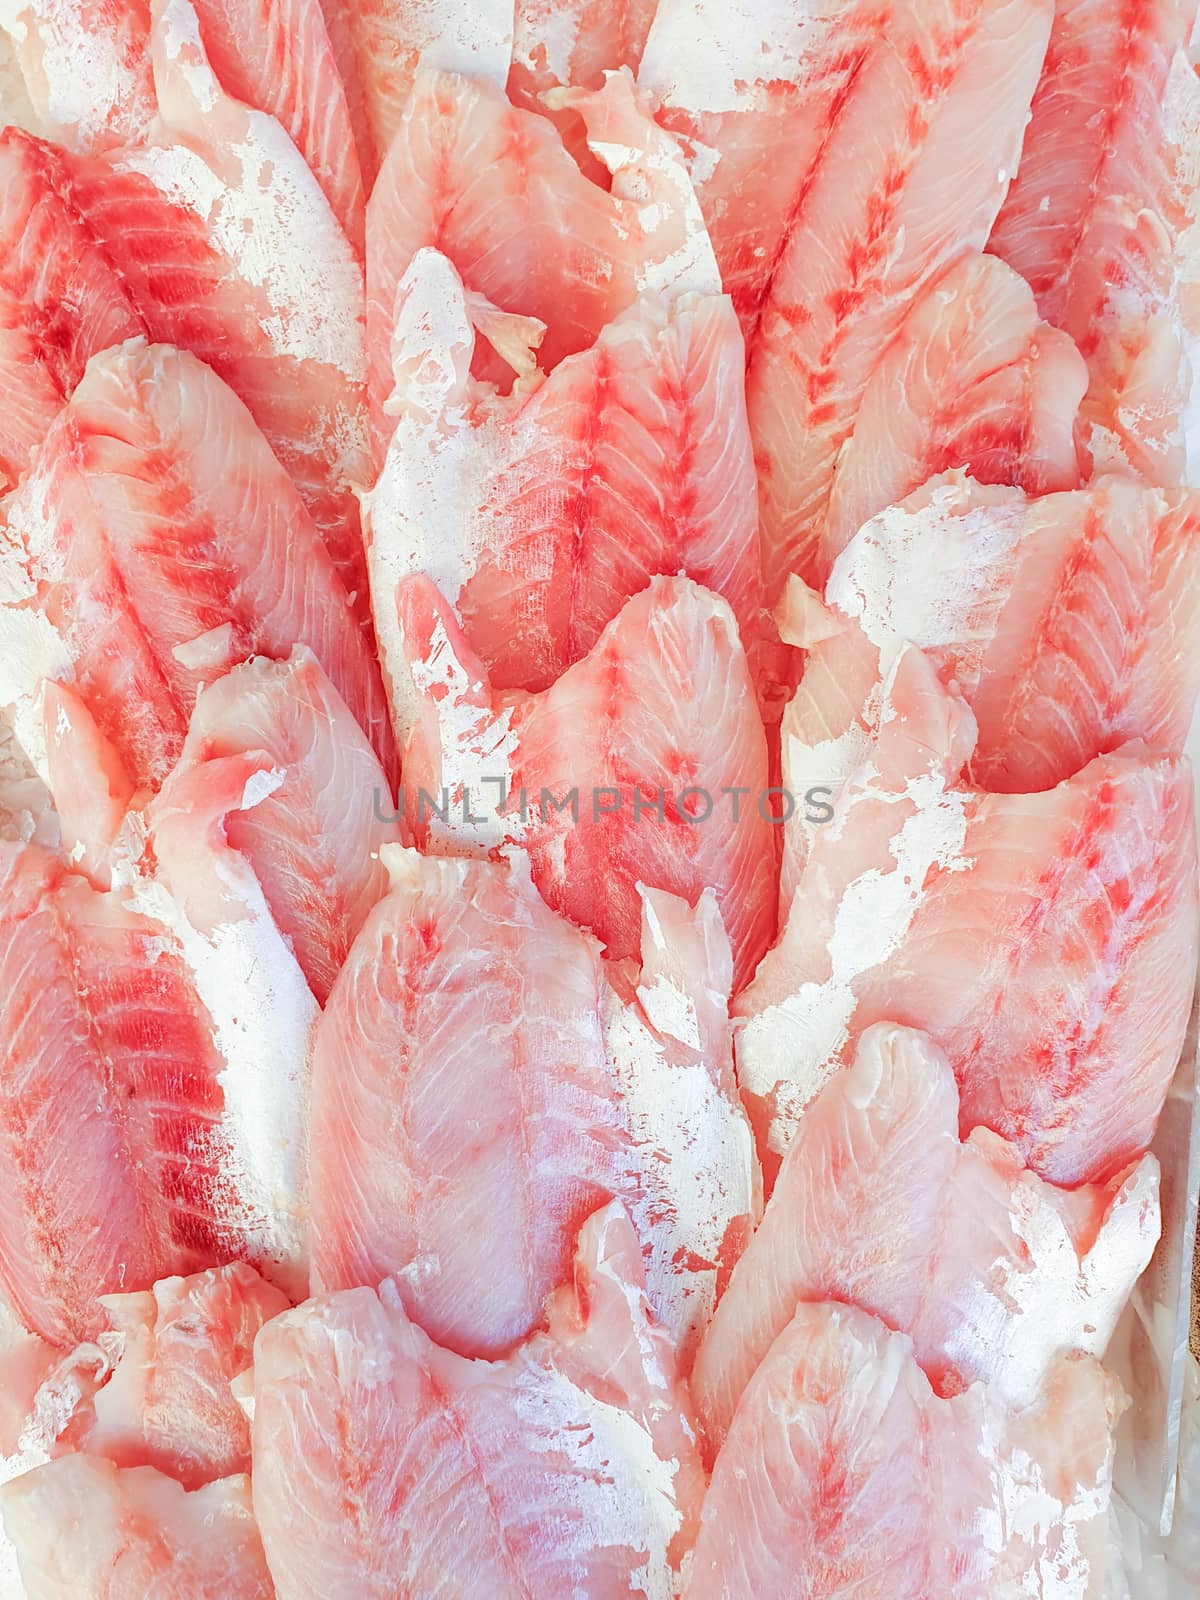 African perch fillet on ice for sale, Fish local market stall with fresh water fish,view from top.